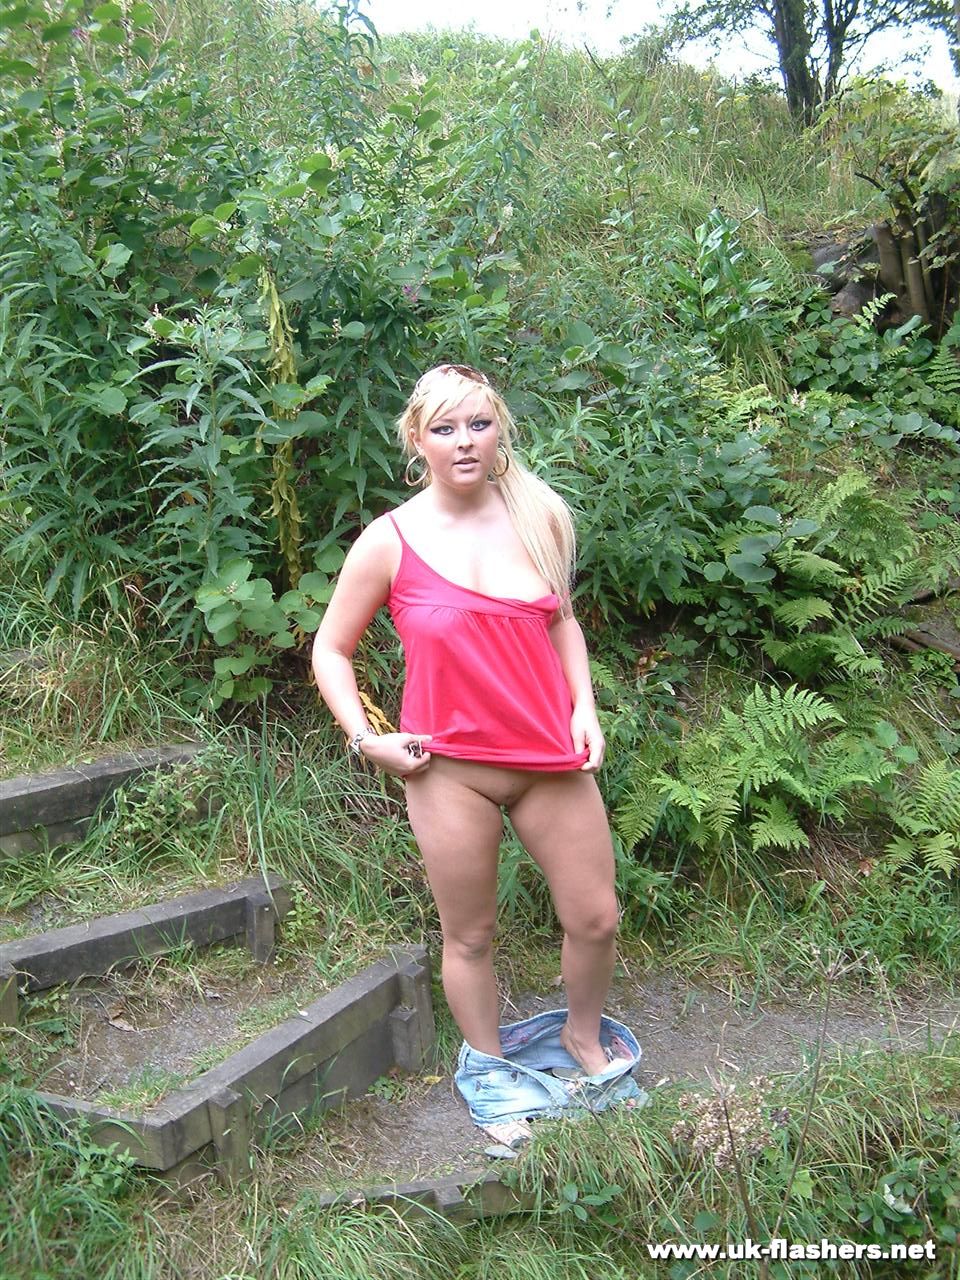 Overweight UK female with blonde hair strips naked on a popular walking trails 色情照片 #428197332